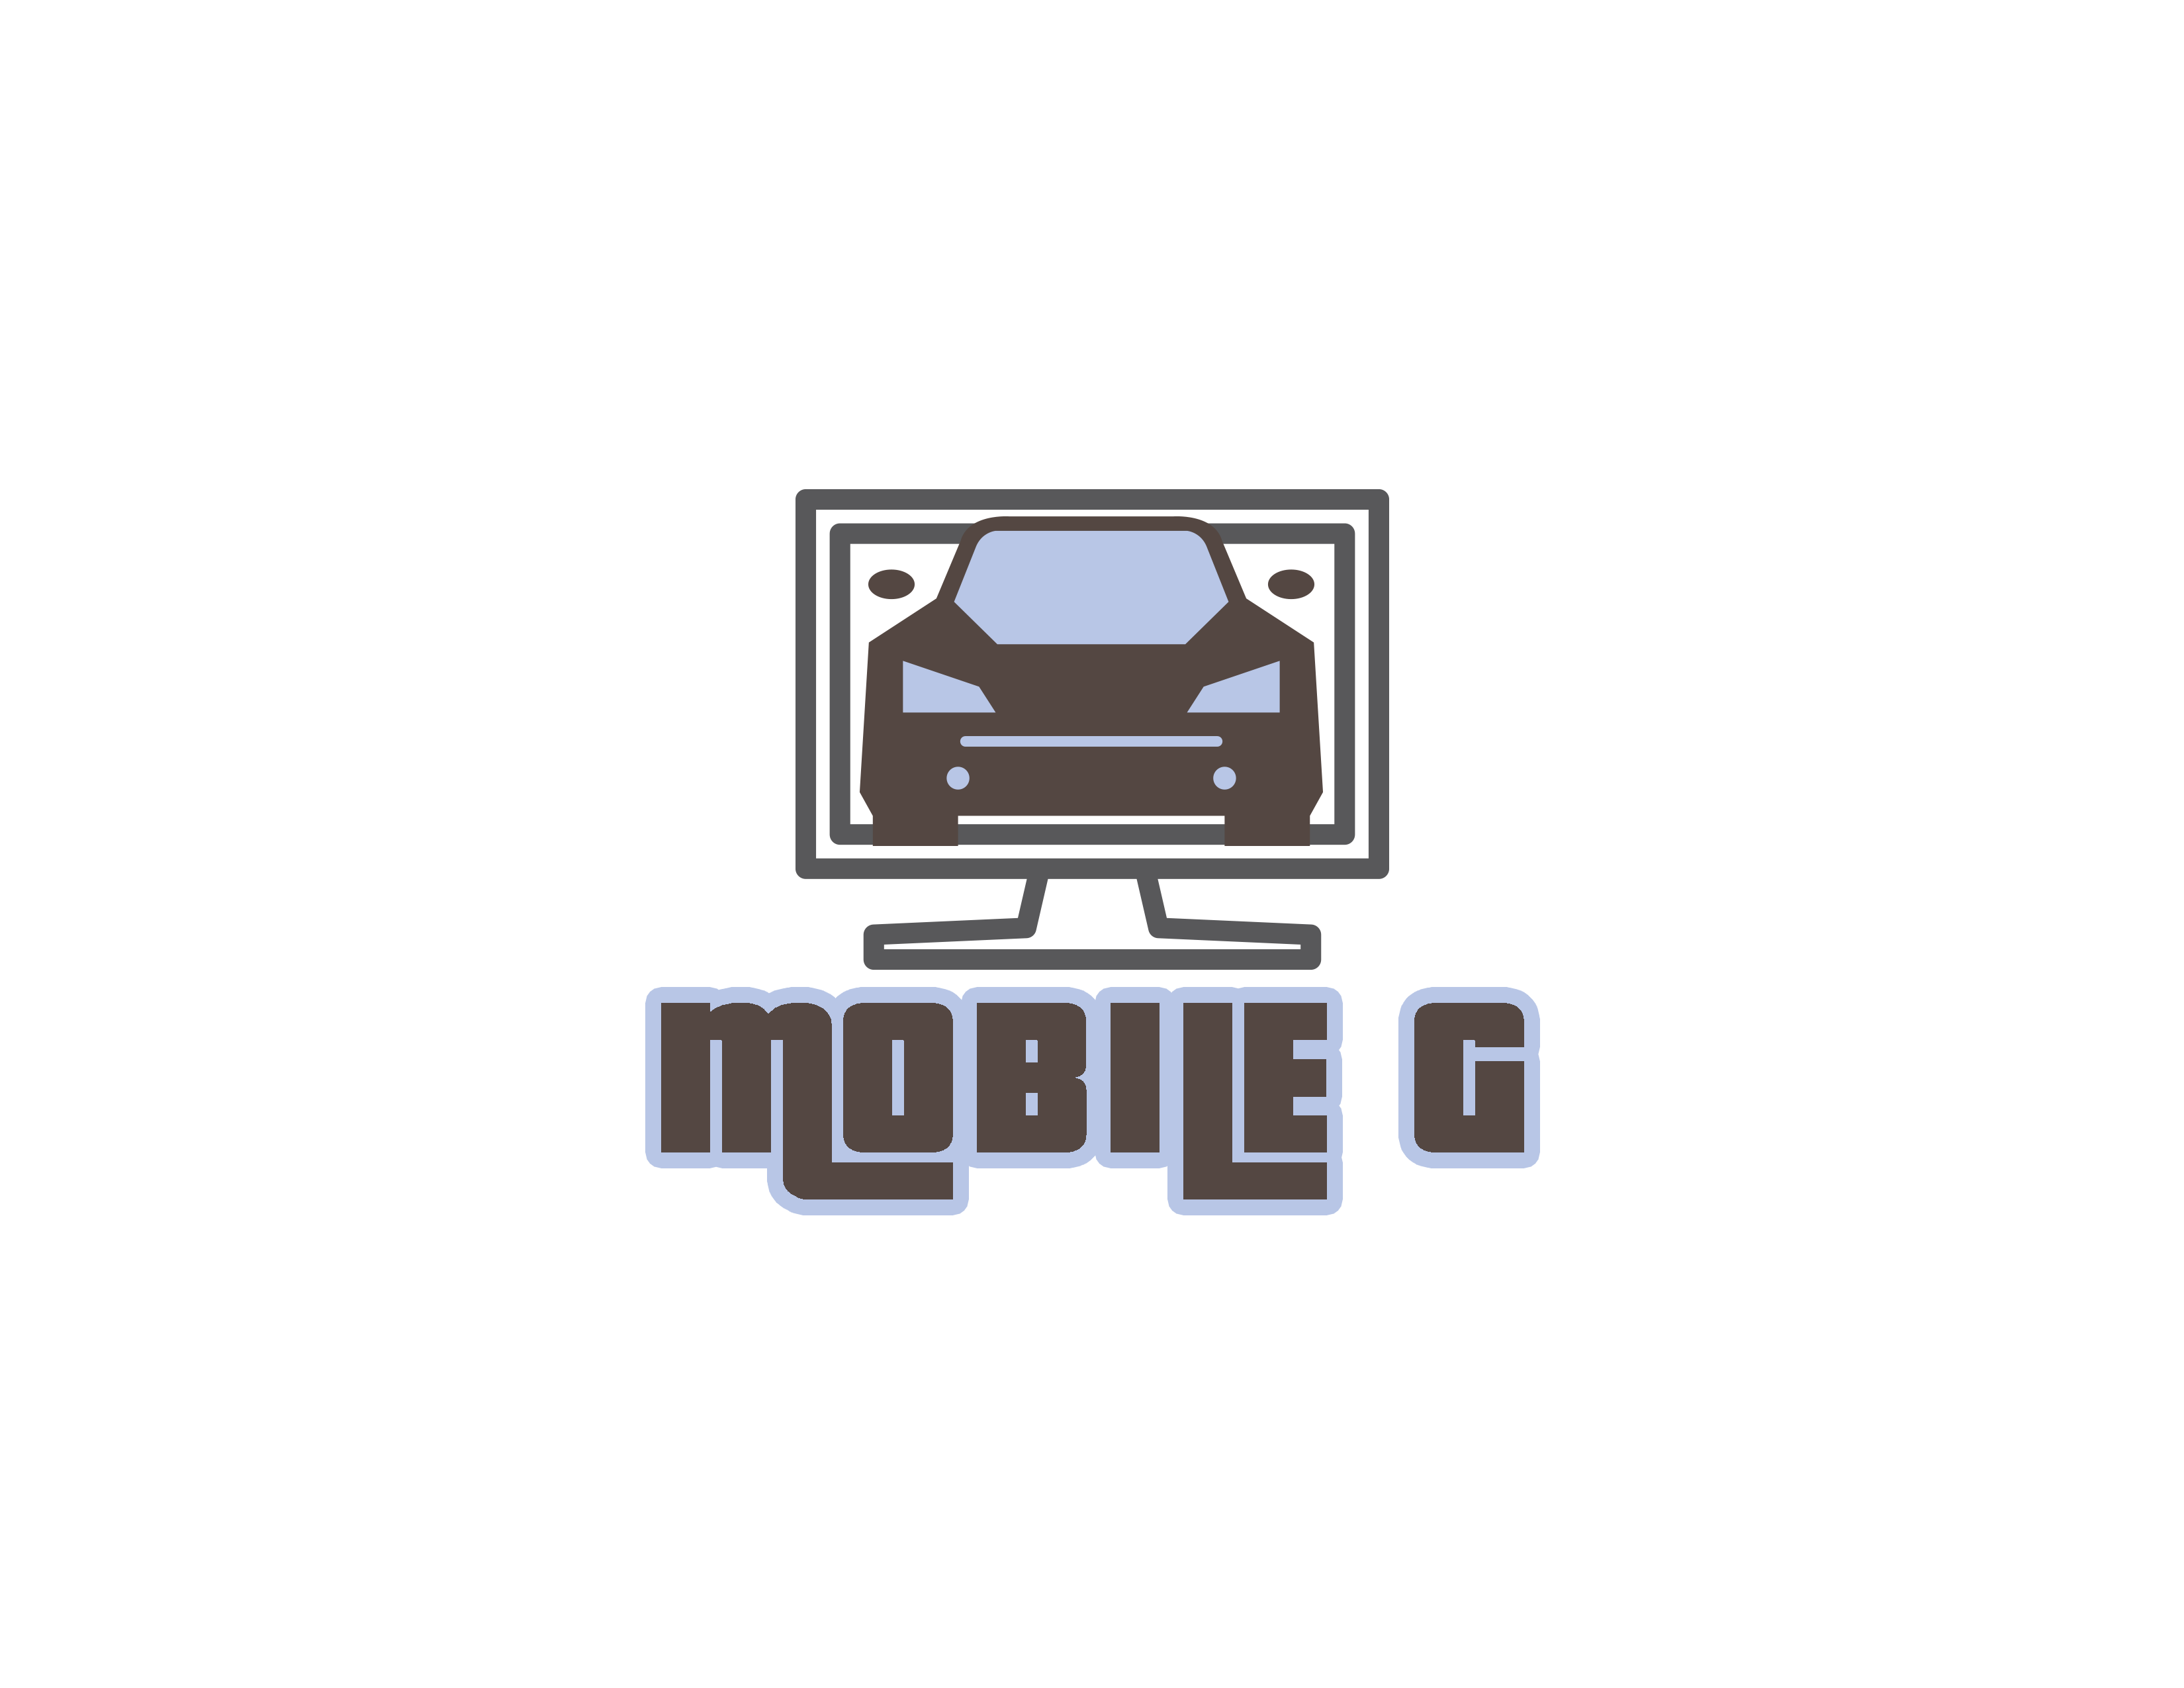 Mobile G gives people an easy way to play videos from anywhere while on a long trip.